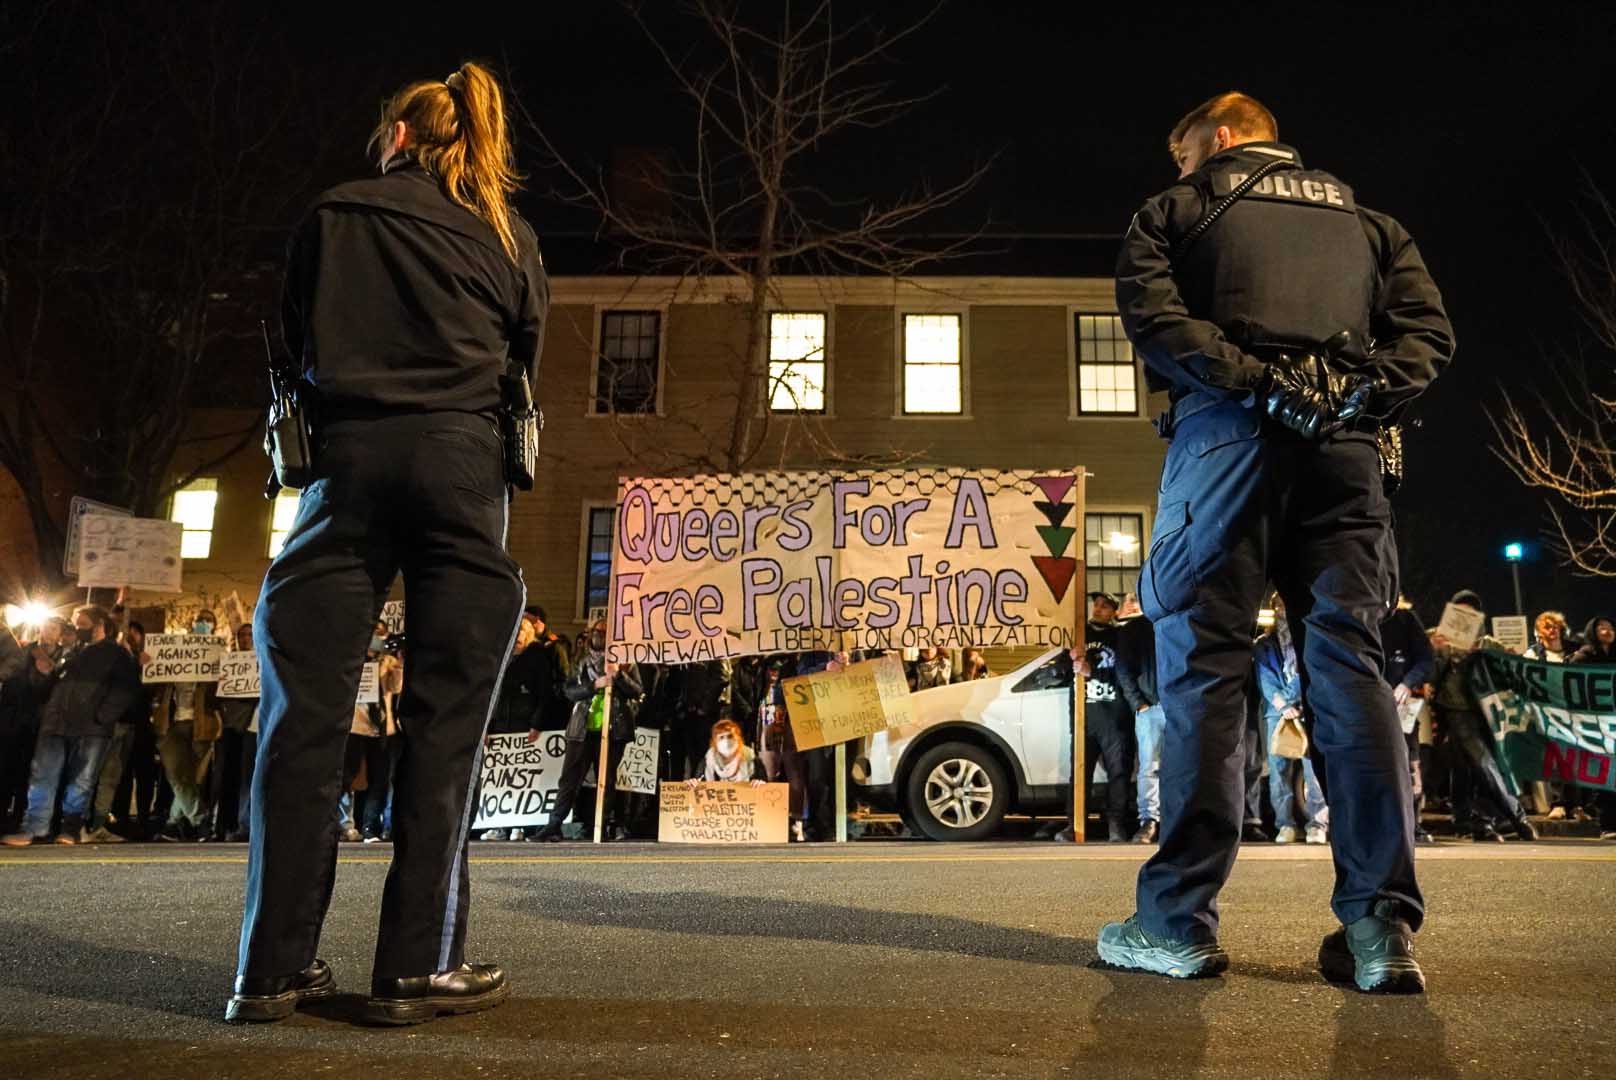 Staff at The Sinclair, a Cambridge concert venue, protest outside the venue, boycotting a concert by Israeli artist Ishay Ribo. More than thirty Sinclair staff members — including managers, bartenders, security, and box office staffers — protested and chanted for five hours outside the concert, which was organized by Harvard Chabad to raise money for Israel.